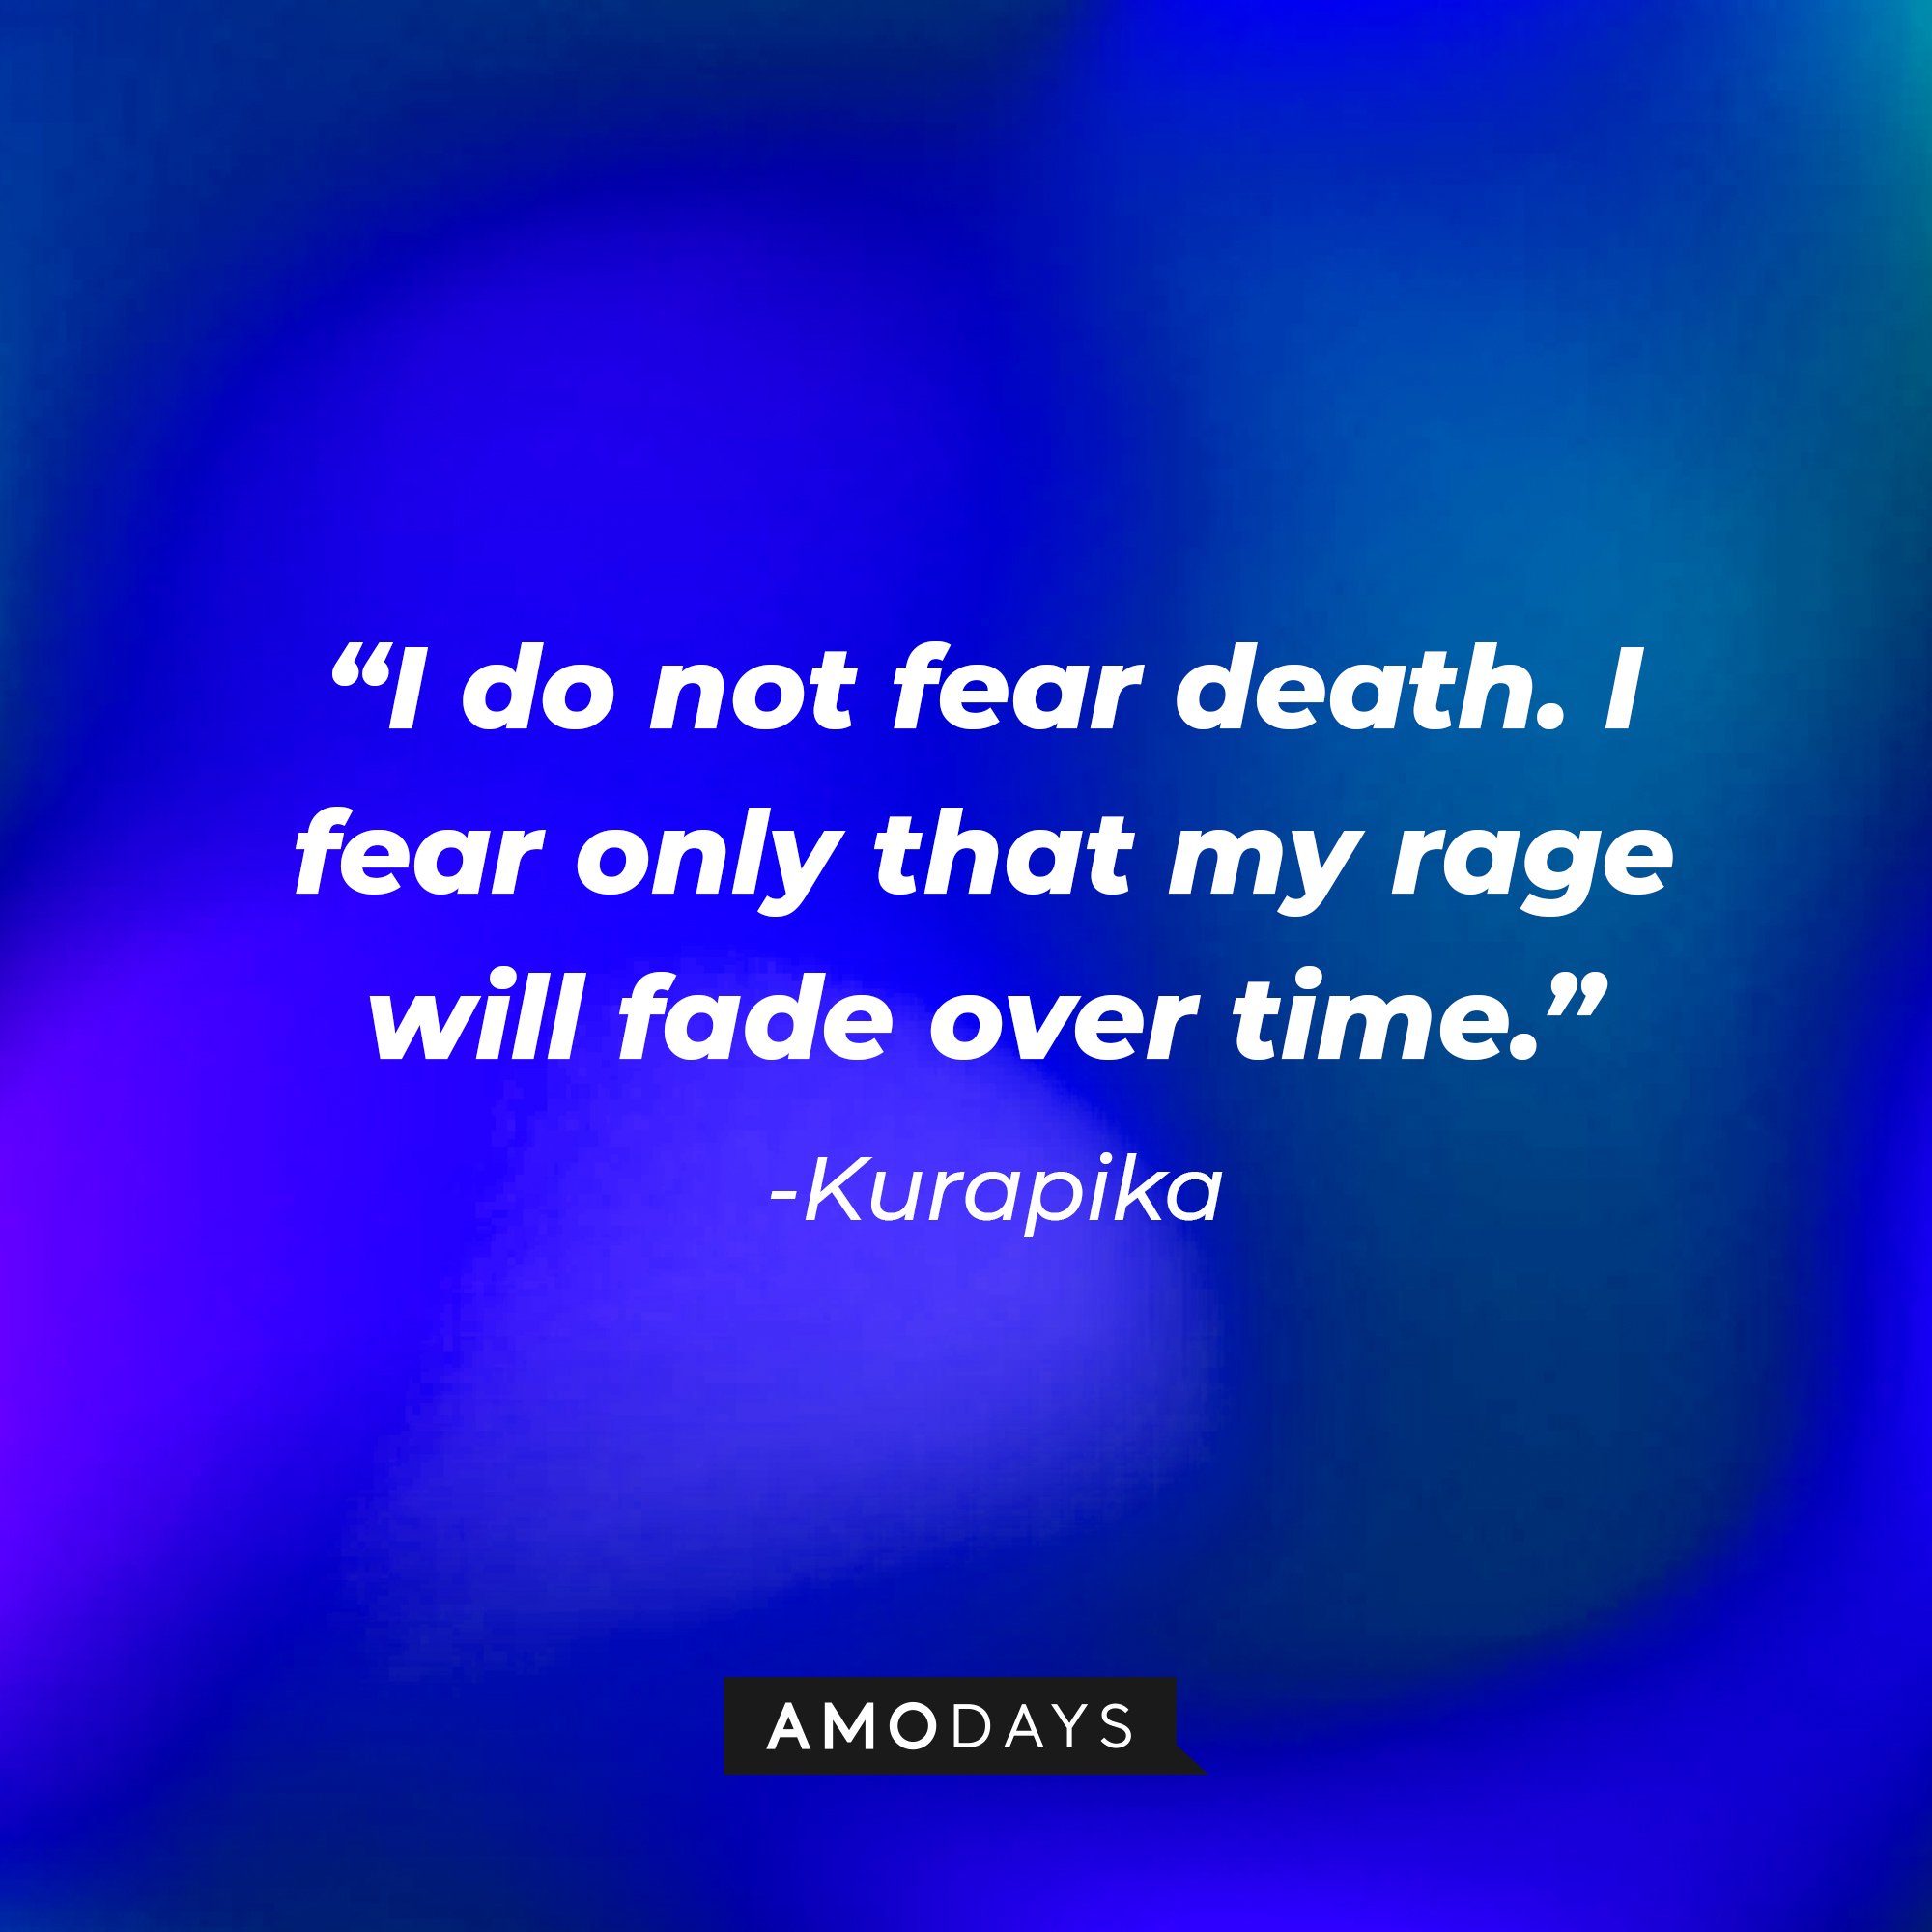  Kurapika’s quote: "I do not fear death. I fear only that my rage will fade over time." |  Image: AmoDays